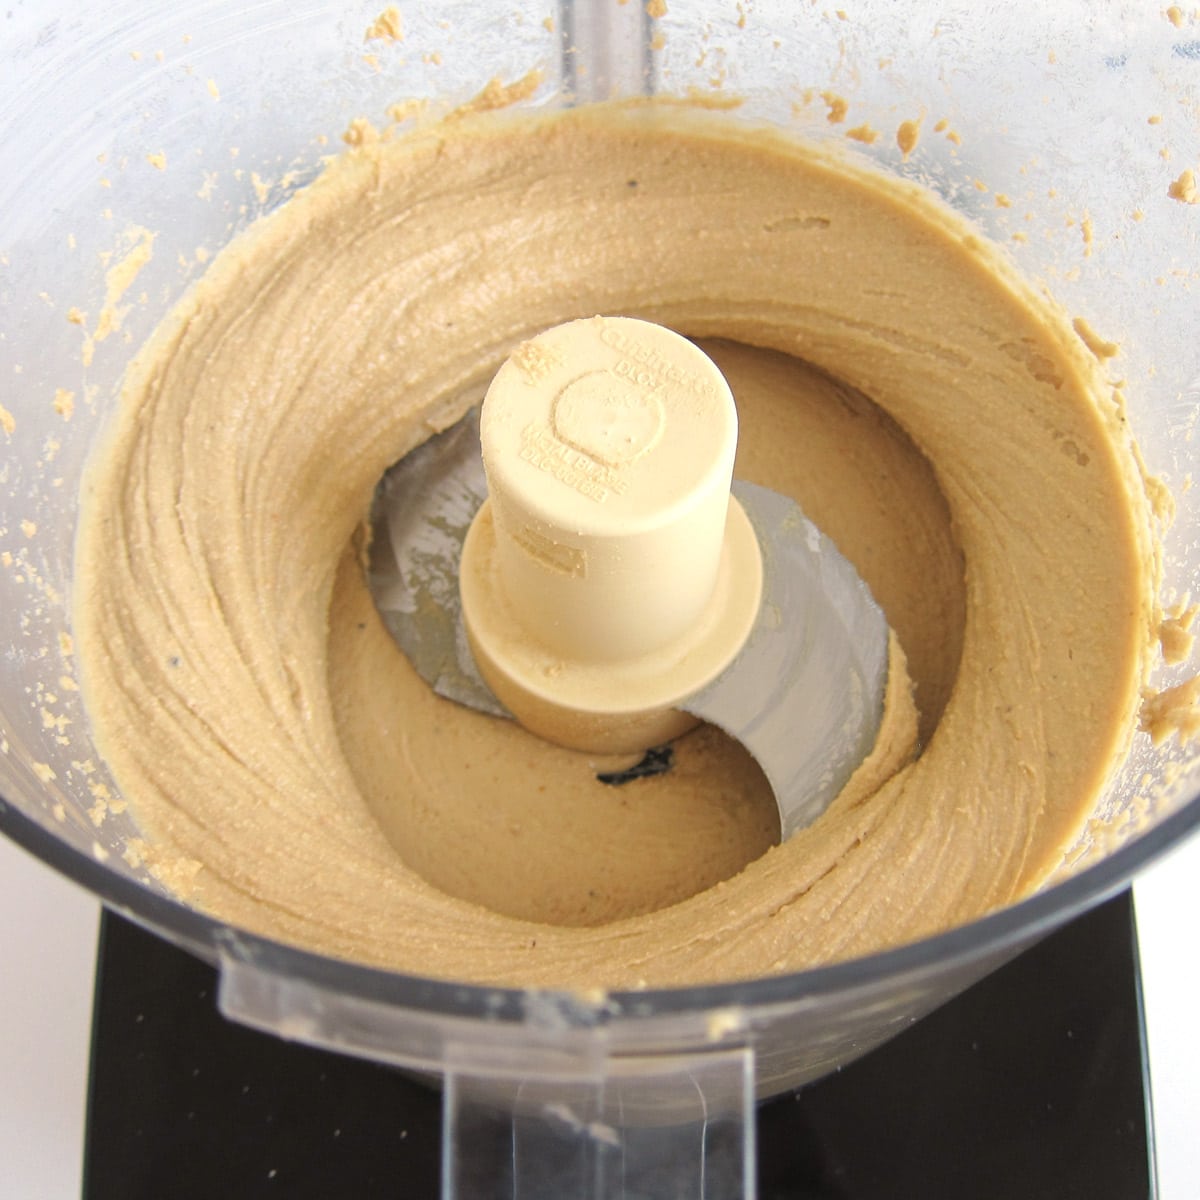 homemade cashew butter made in a food processor.